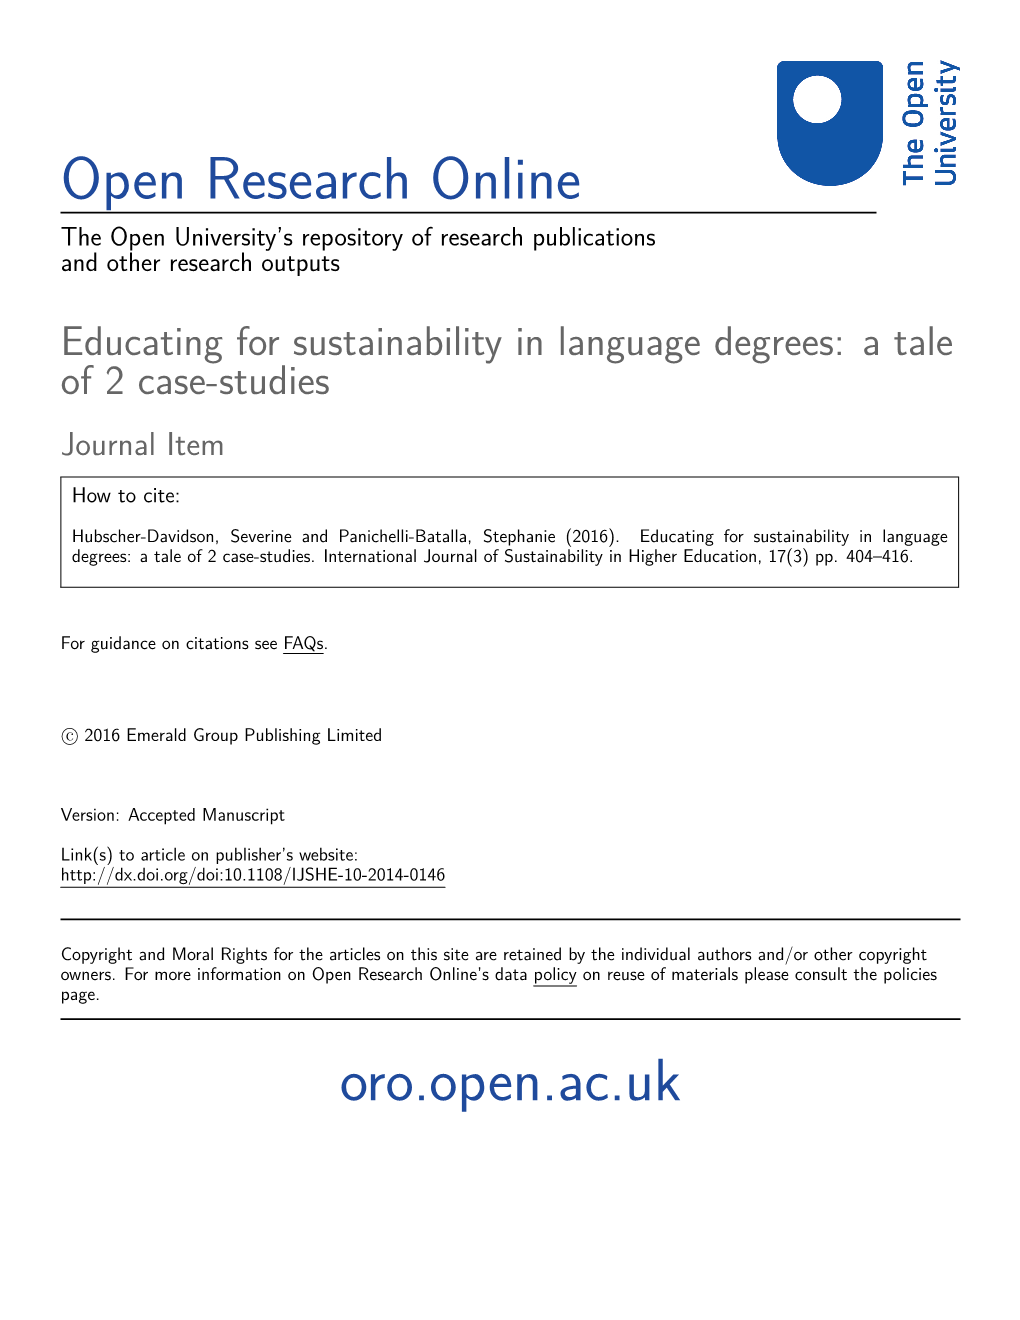 Educating for Sustainability in Language Degrees: a Tale of 2 Case-Studies Journal Item